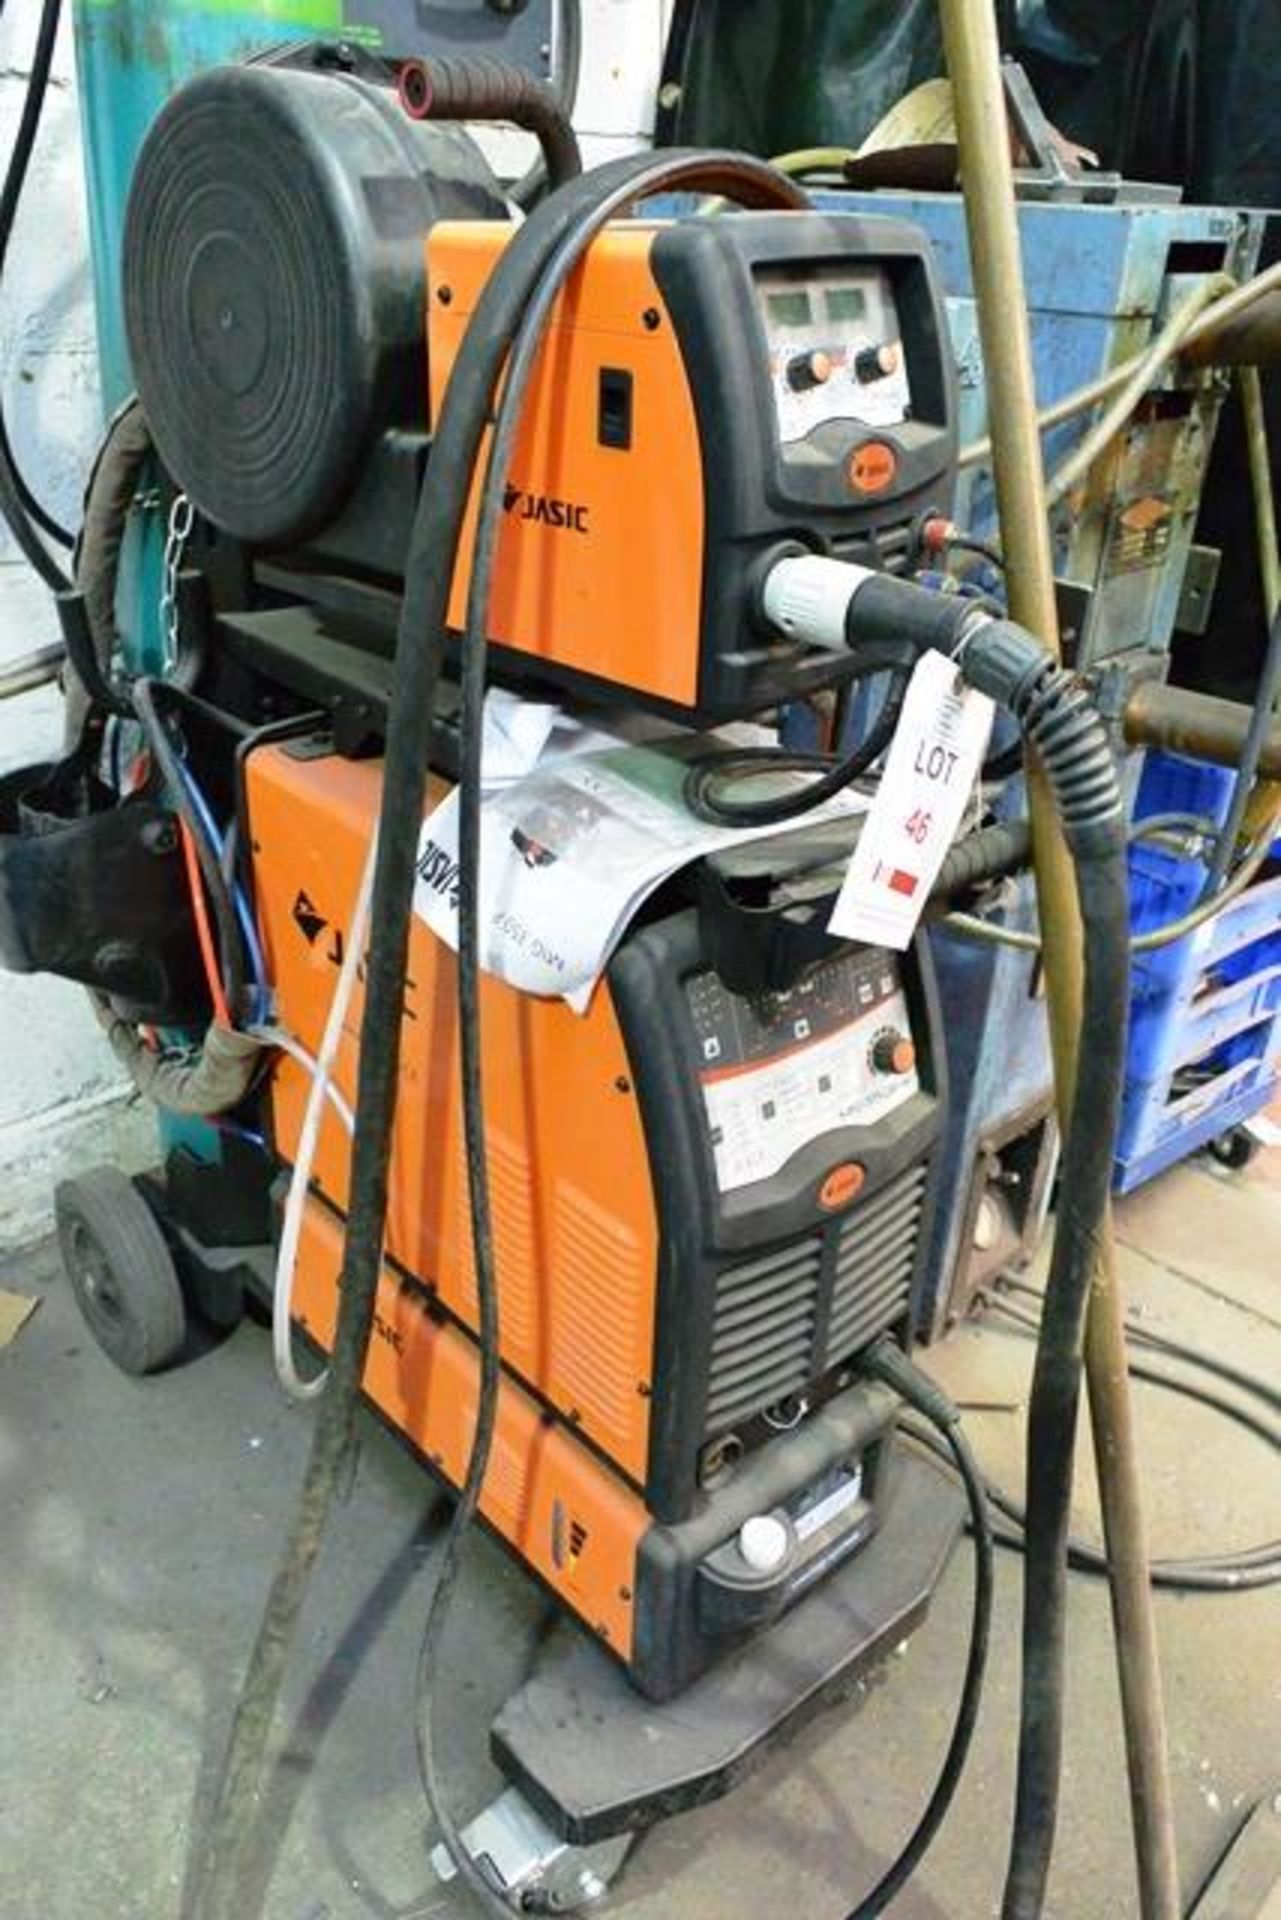 Jasic Mig 350P mig welder, with PO40 inching feed system and water cooling